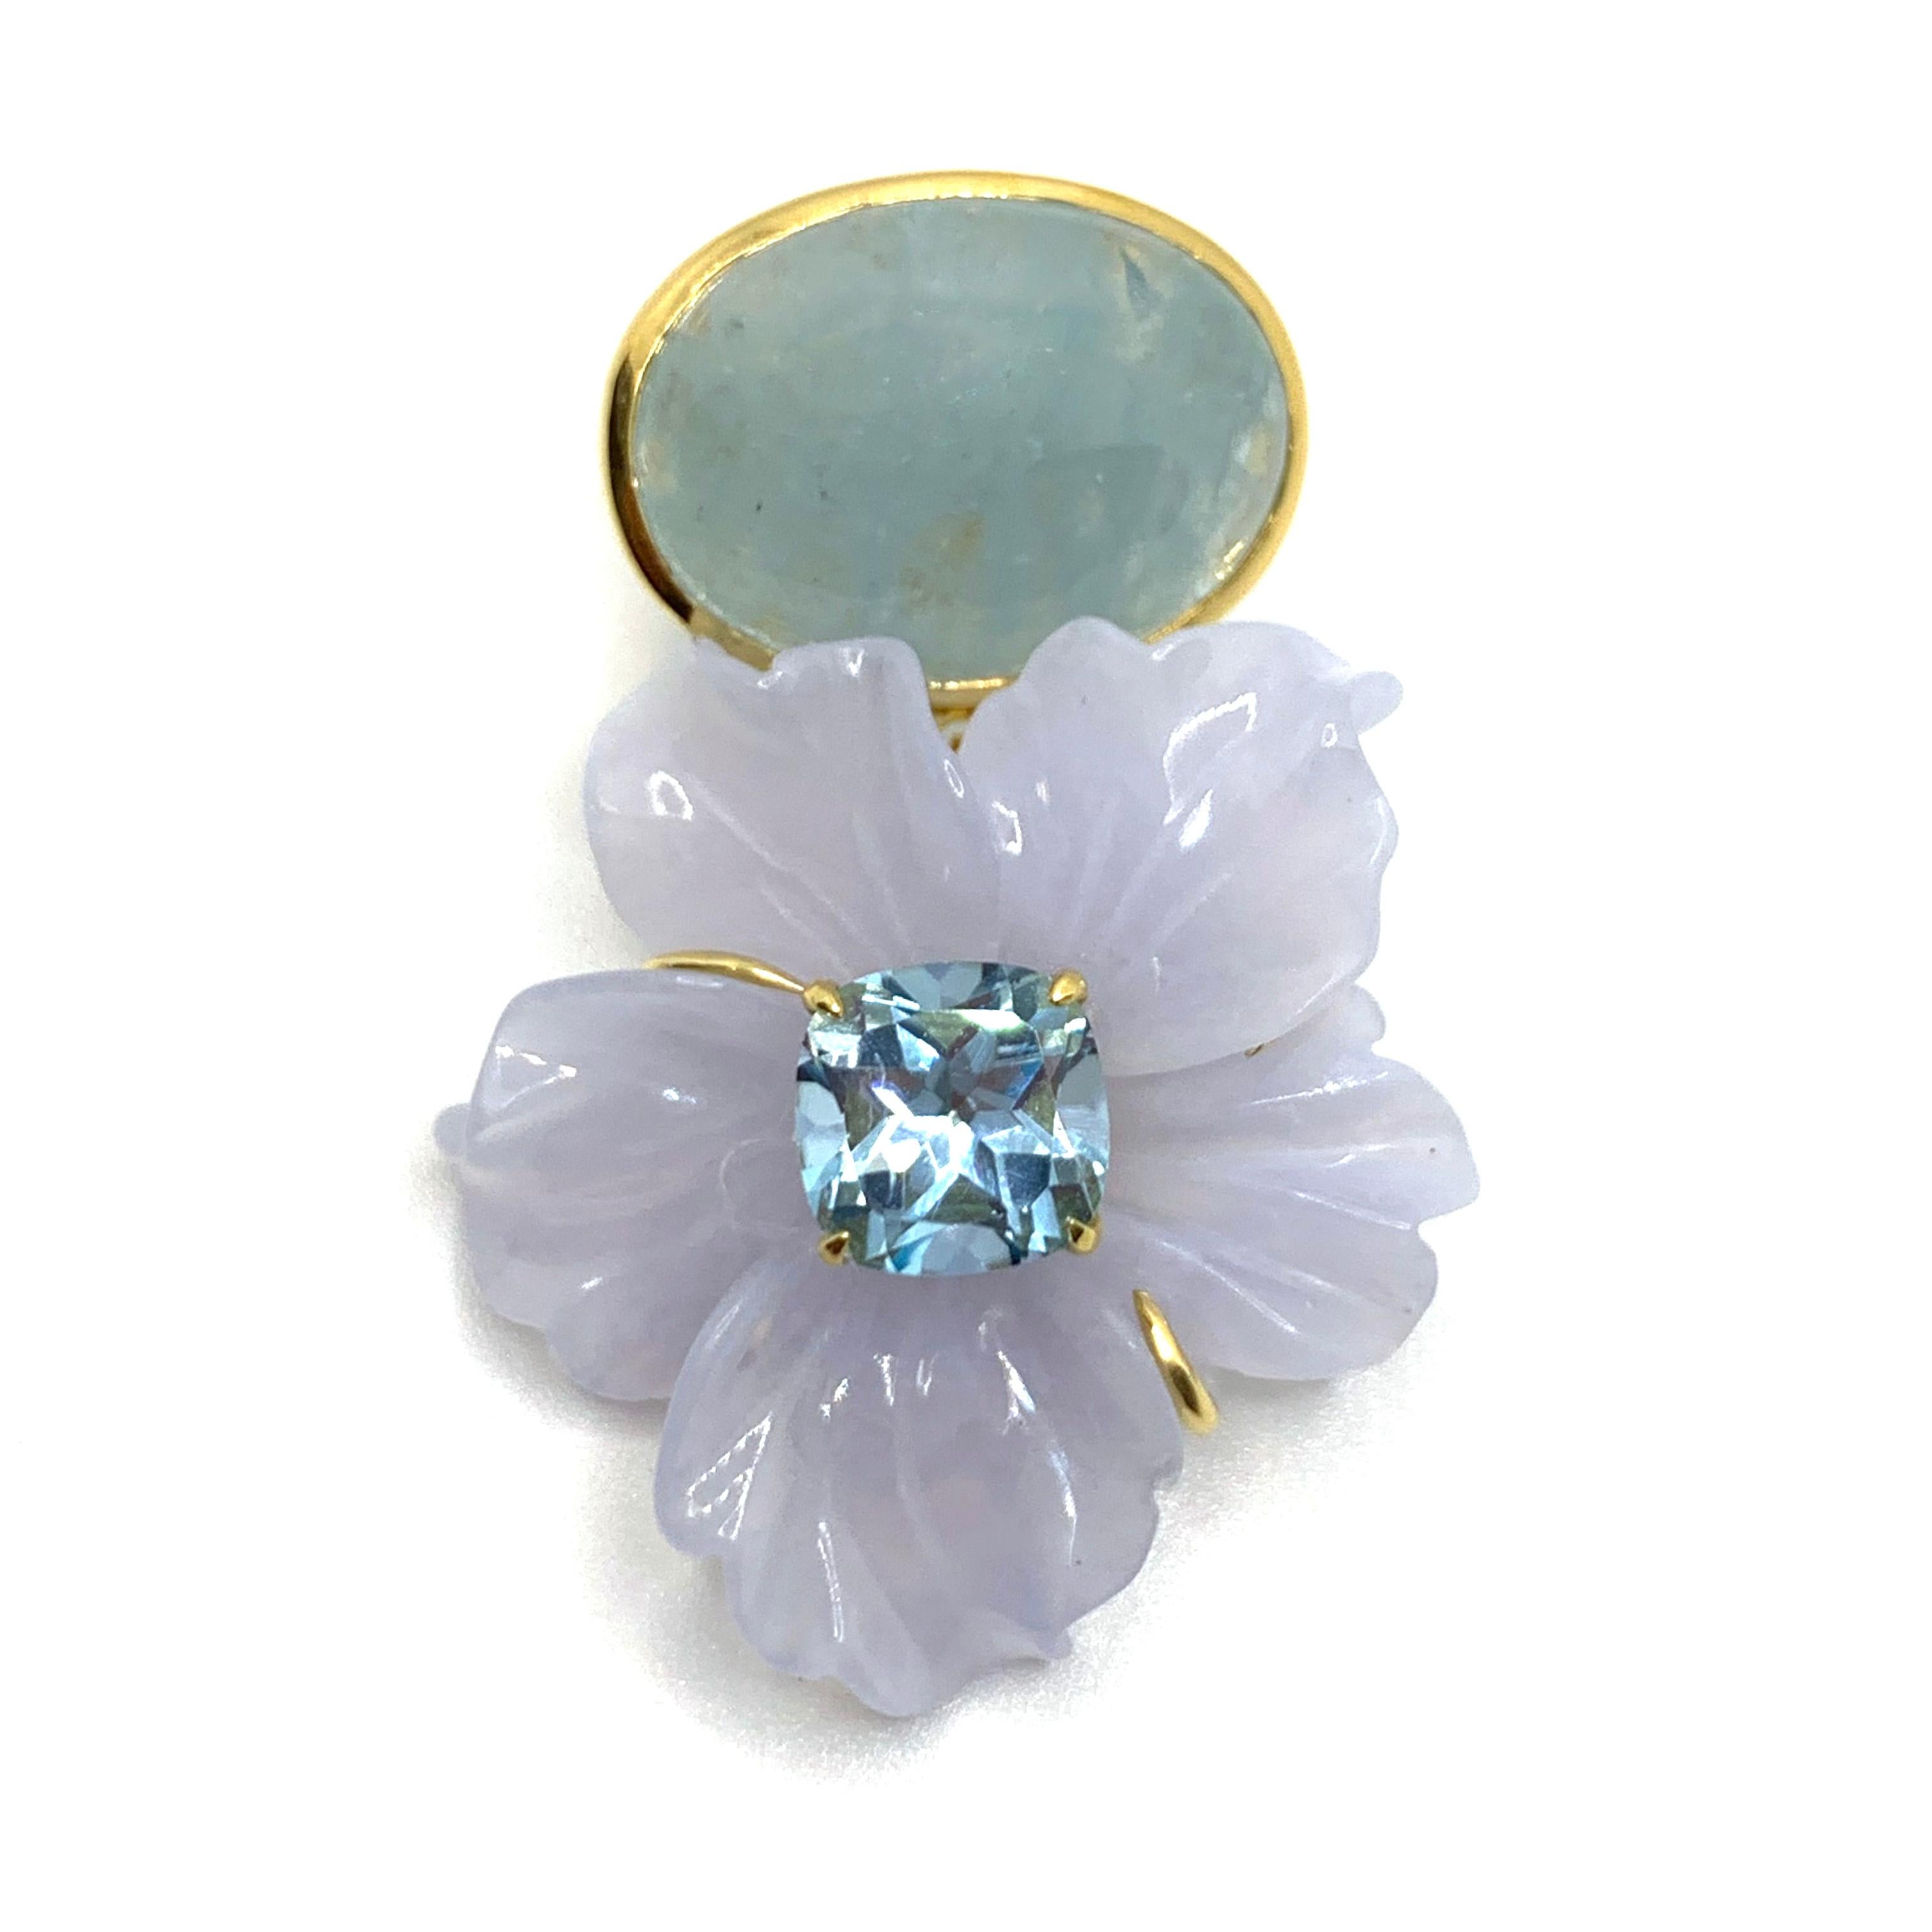 Artisan Stunning Cabochon Aquamarine and Carved Chalcedony Flower Drop Earrings